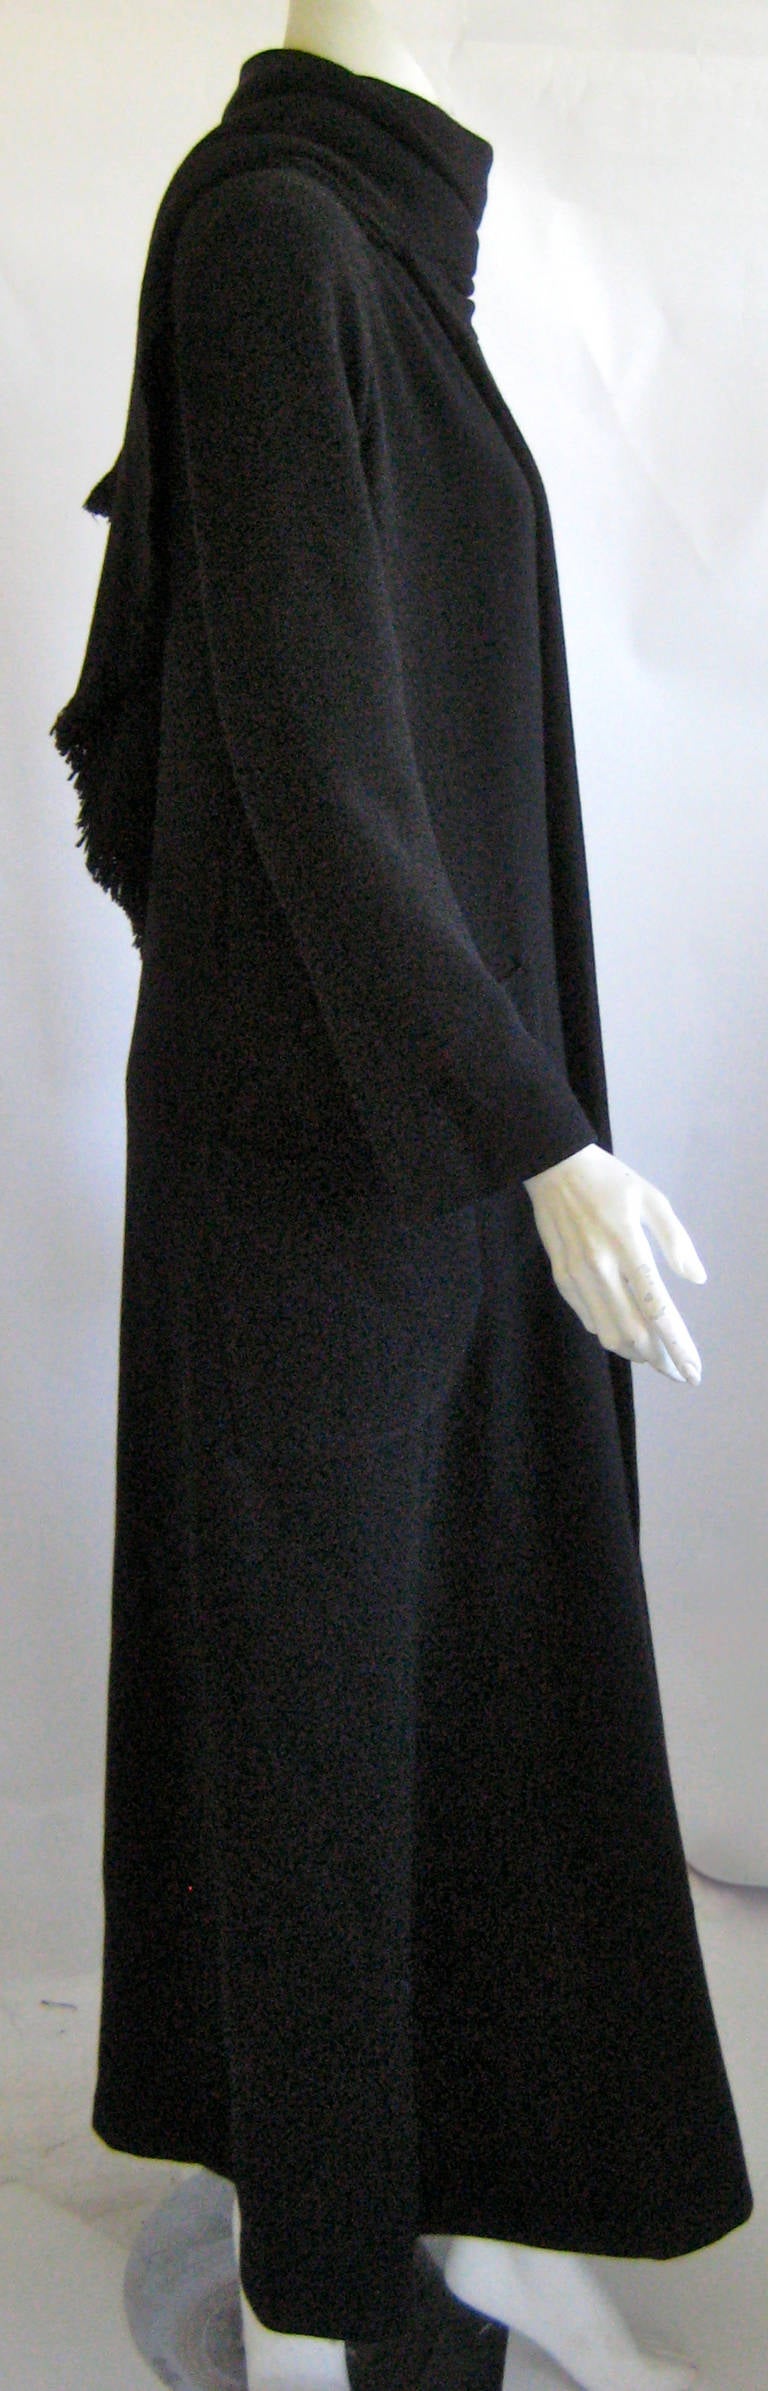 Yohji Yamamoto Maxi Coat with Attached  Scarf In Excellent Condition For Sale In Chicago, IL